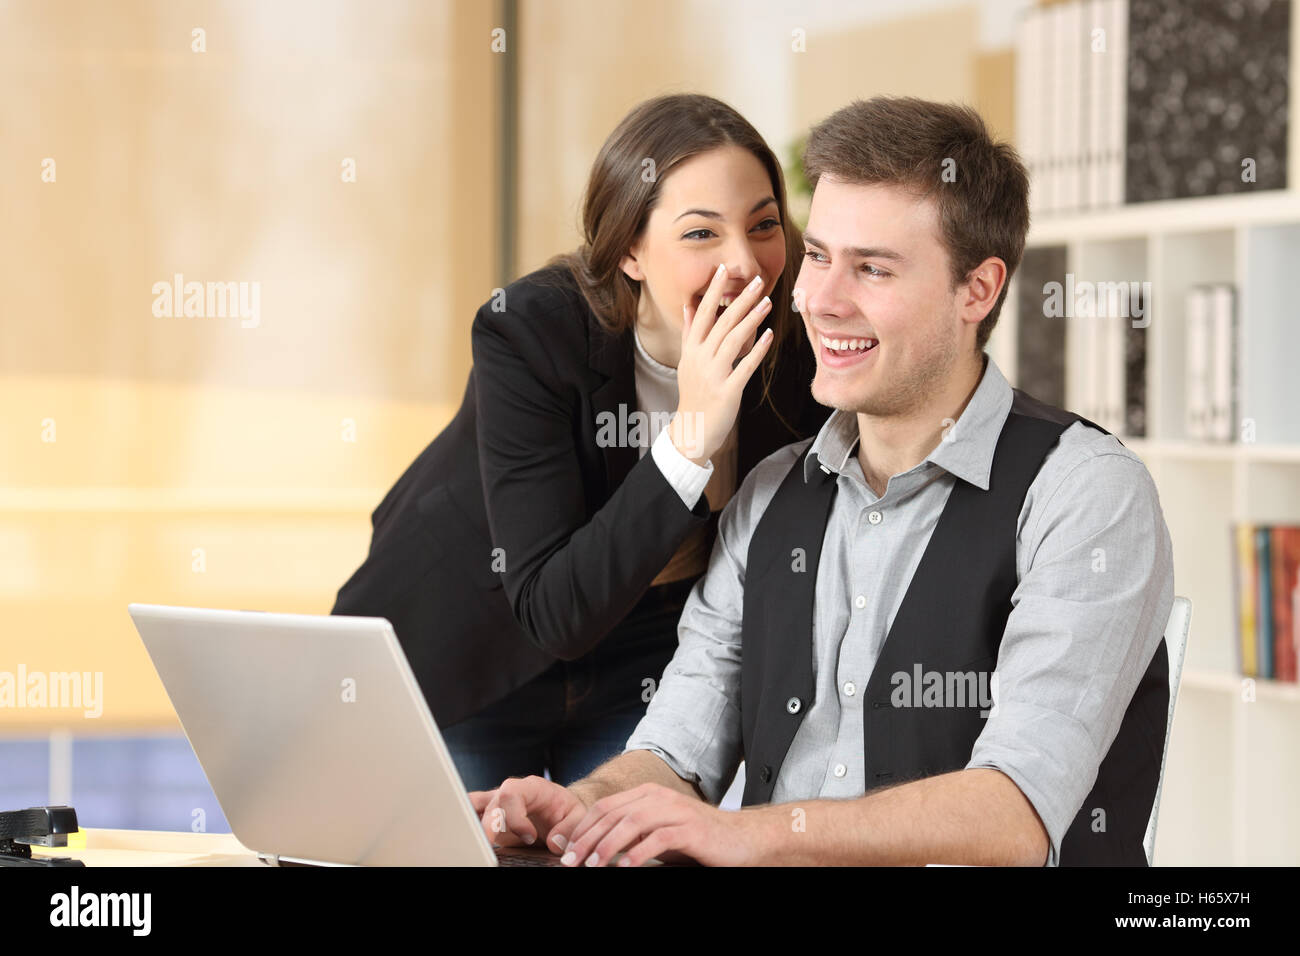 Gossip businesswoman telling secrets to the ear of a businessman sitting on a desktop at office Stock Photo